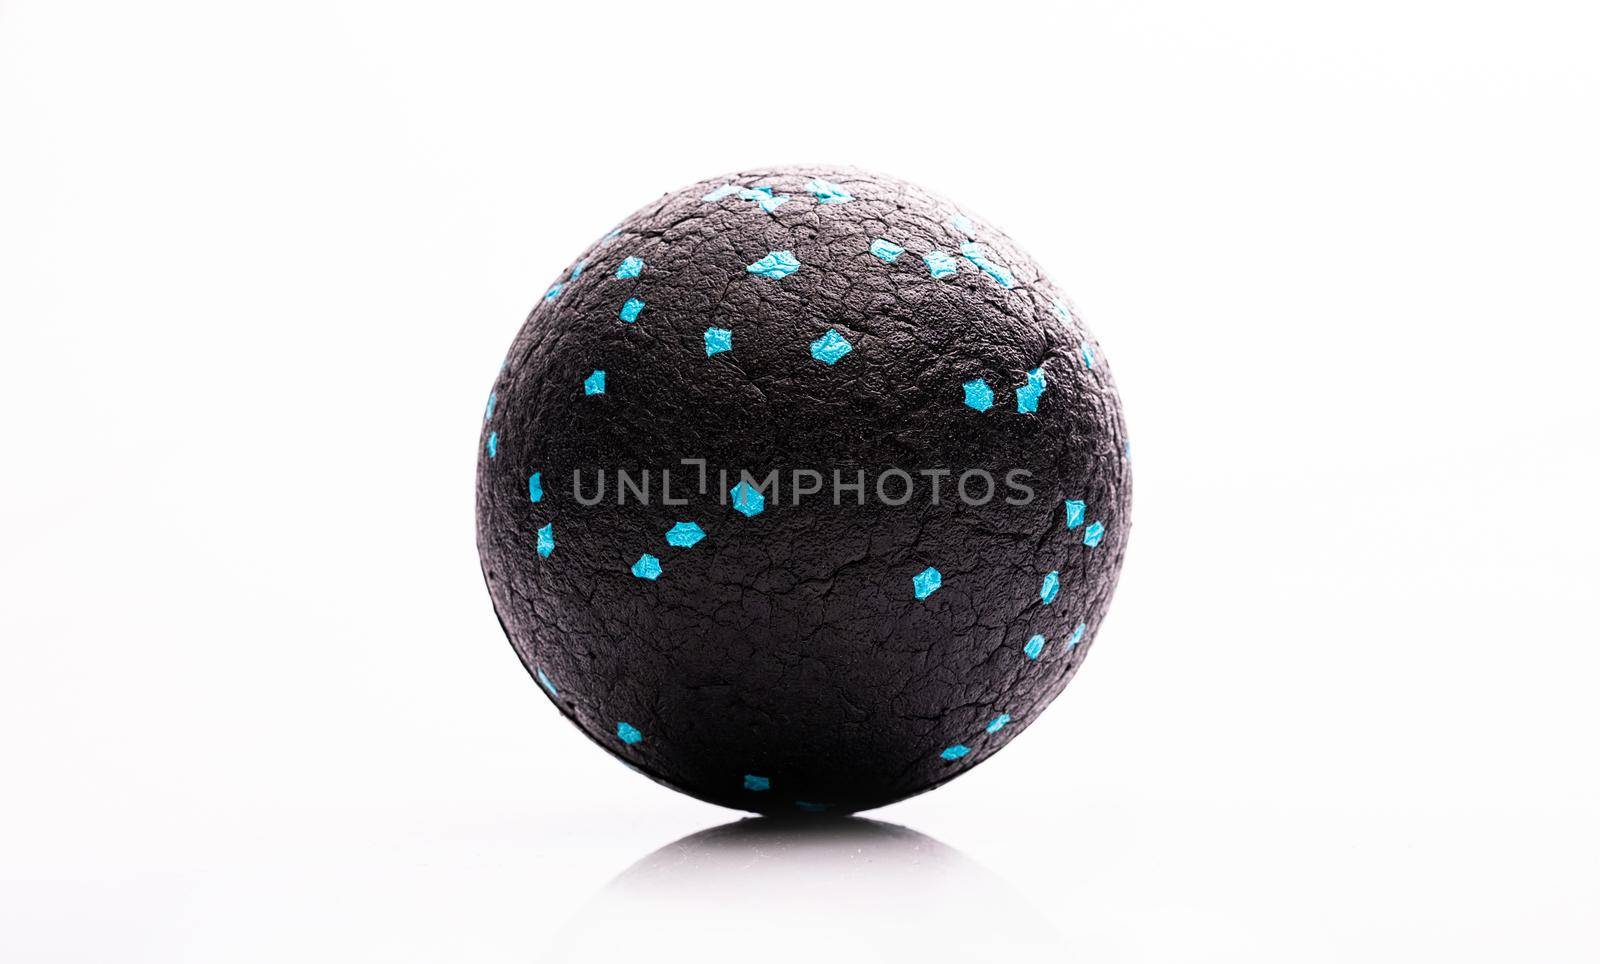 Massage therapy ball for muscle relaxation. Medical equipment for body recovery and stress relief